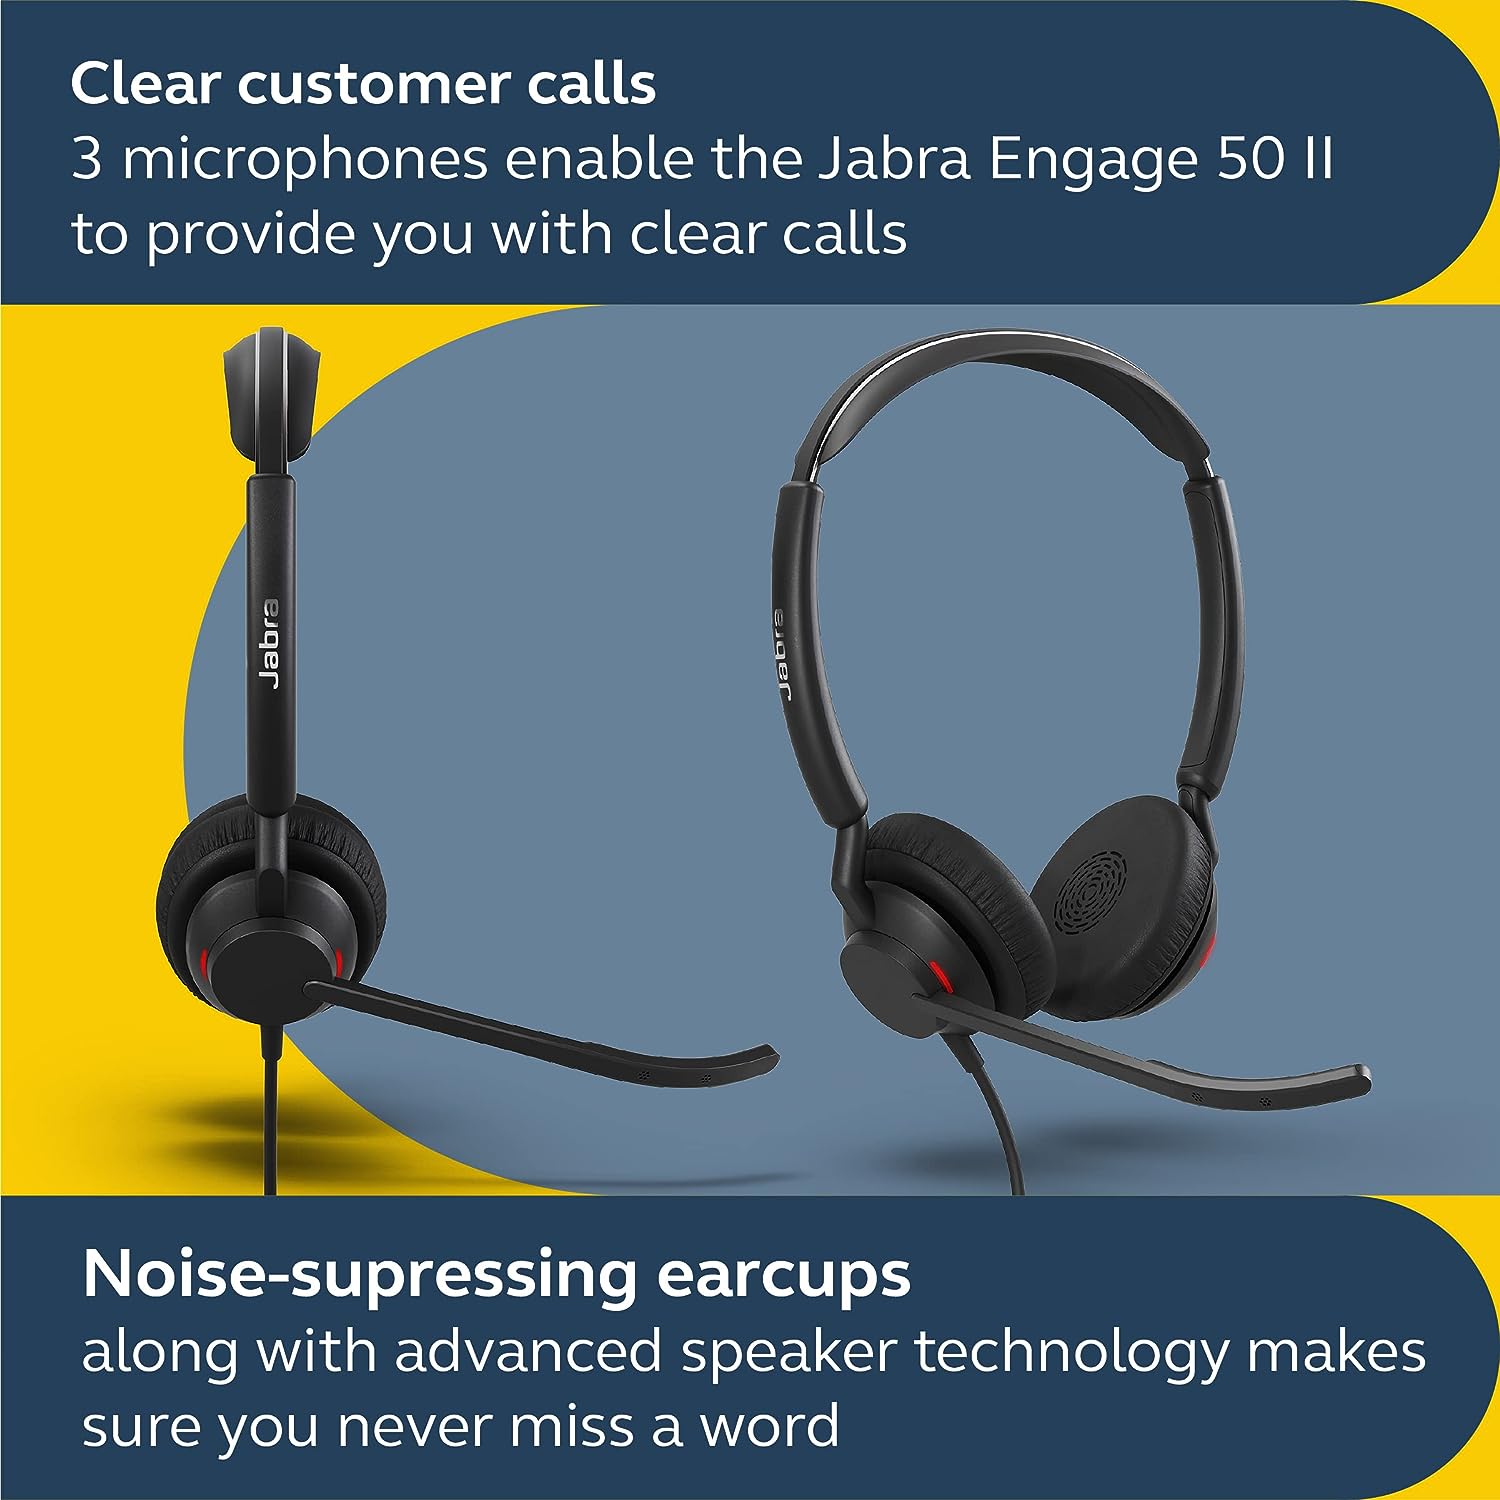 Jabra Engage 50 II Wired Stereo Headset with Link Call Control - Noise-Cancelling 3-Mic Technology, USB-C Cable - Works with All Leading Unified Communications Platforms